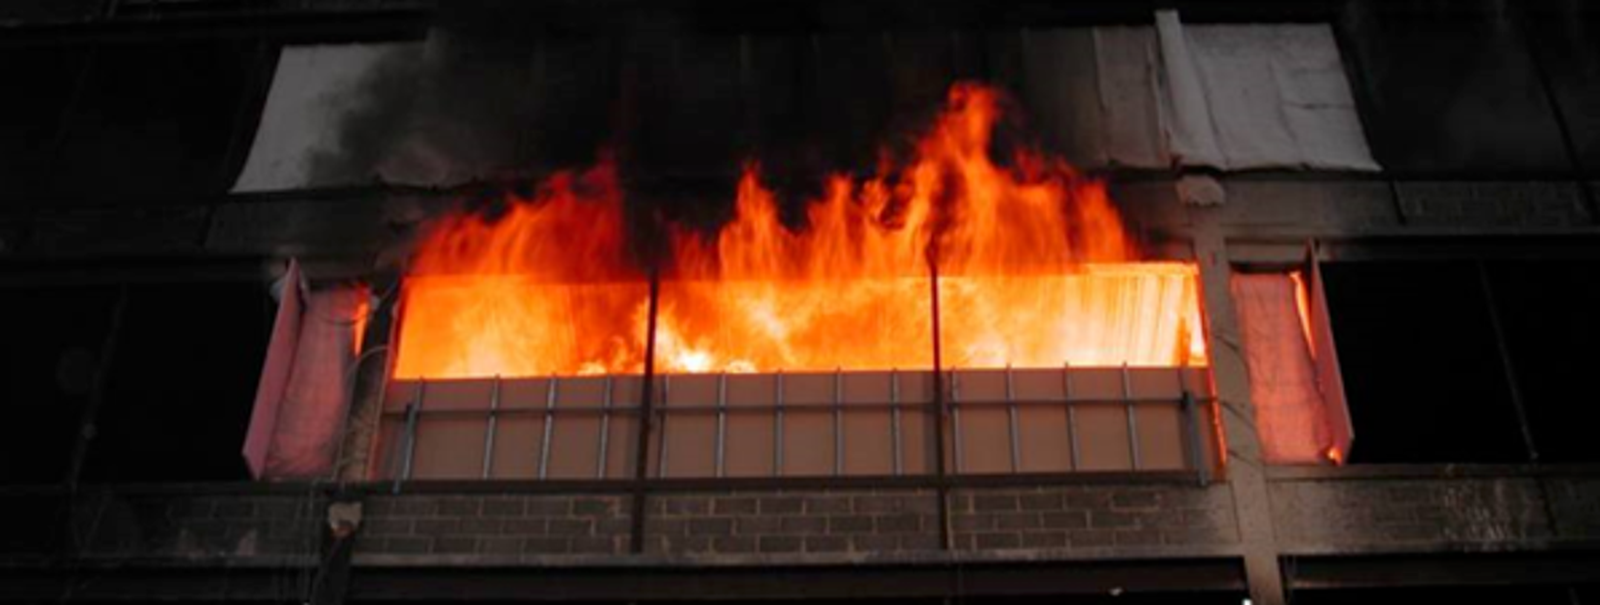 Fire Damage Assessment and Reinstatement of Steel Structures